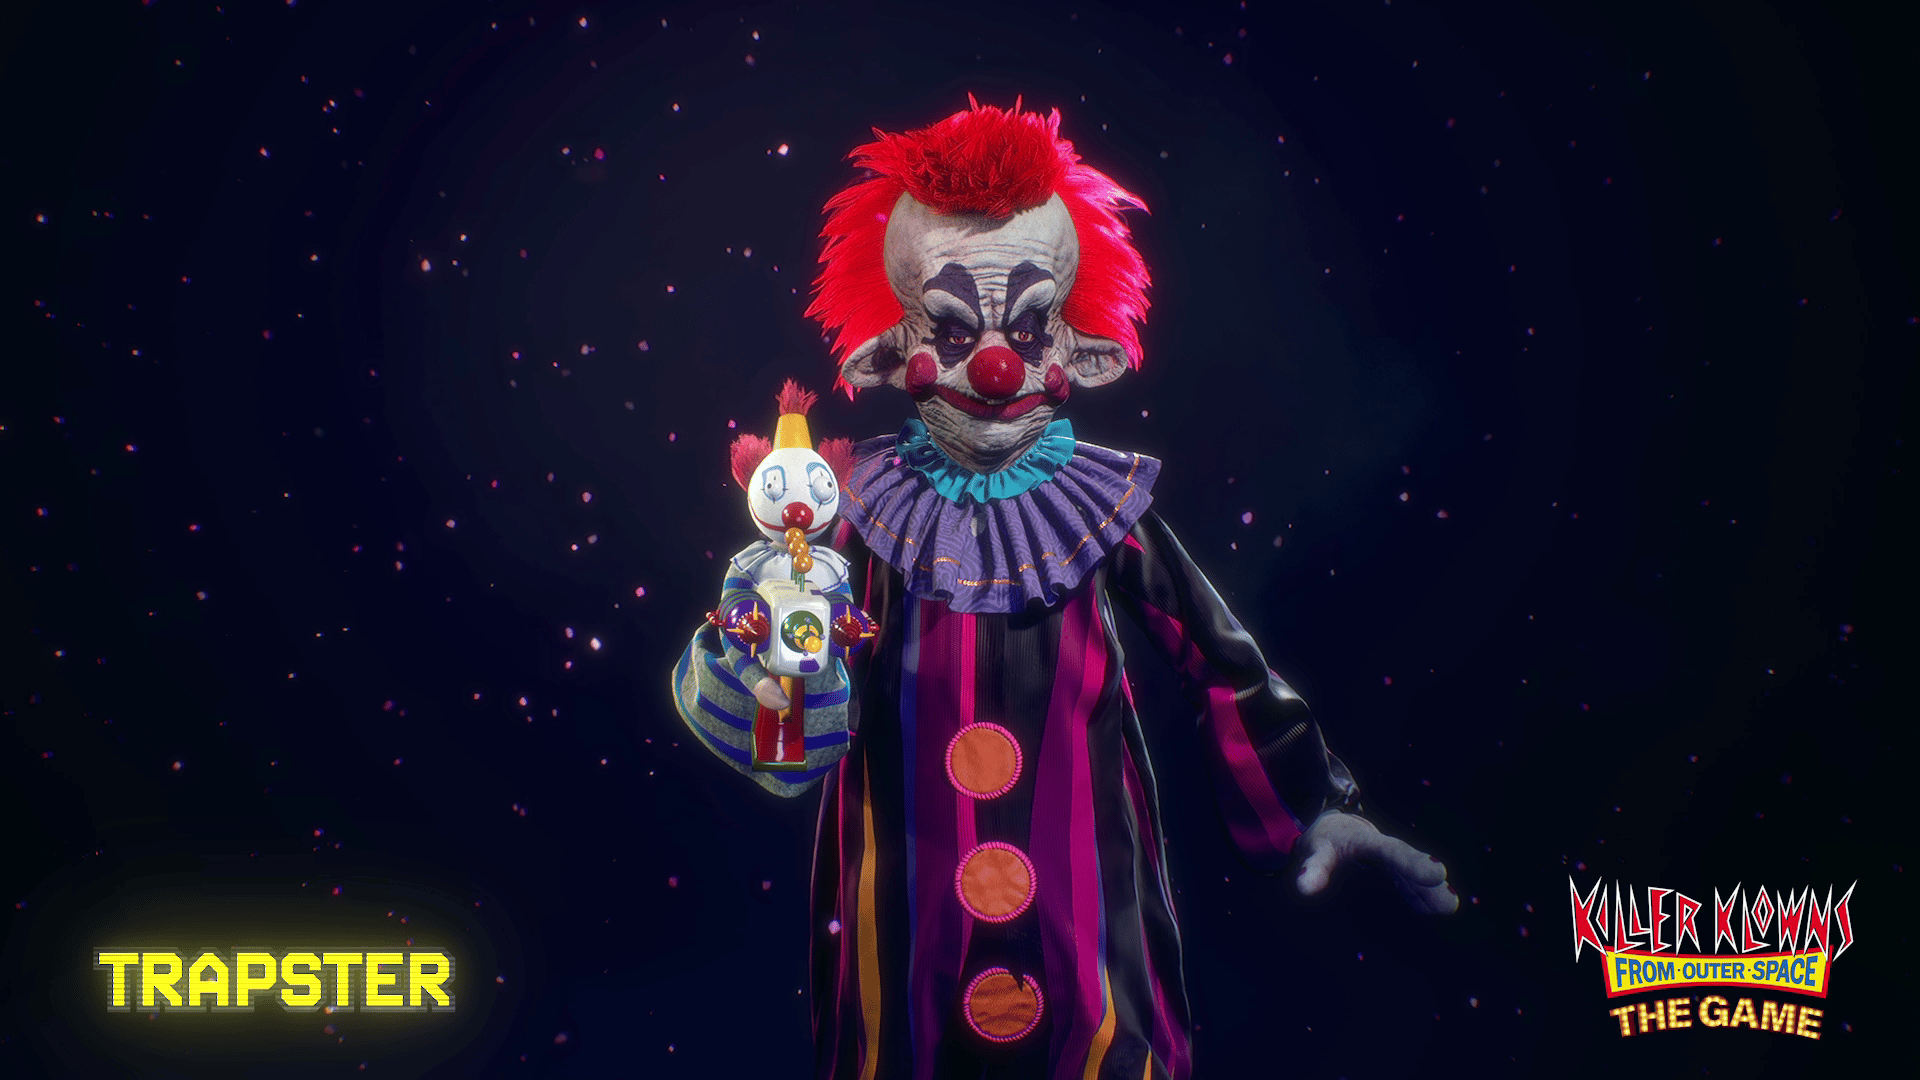 Killer from outer space. Killer Klowns from Outer Space the game. Клоун. Killer Klowns from Outer Space. Клоуны 6 класс.